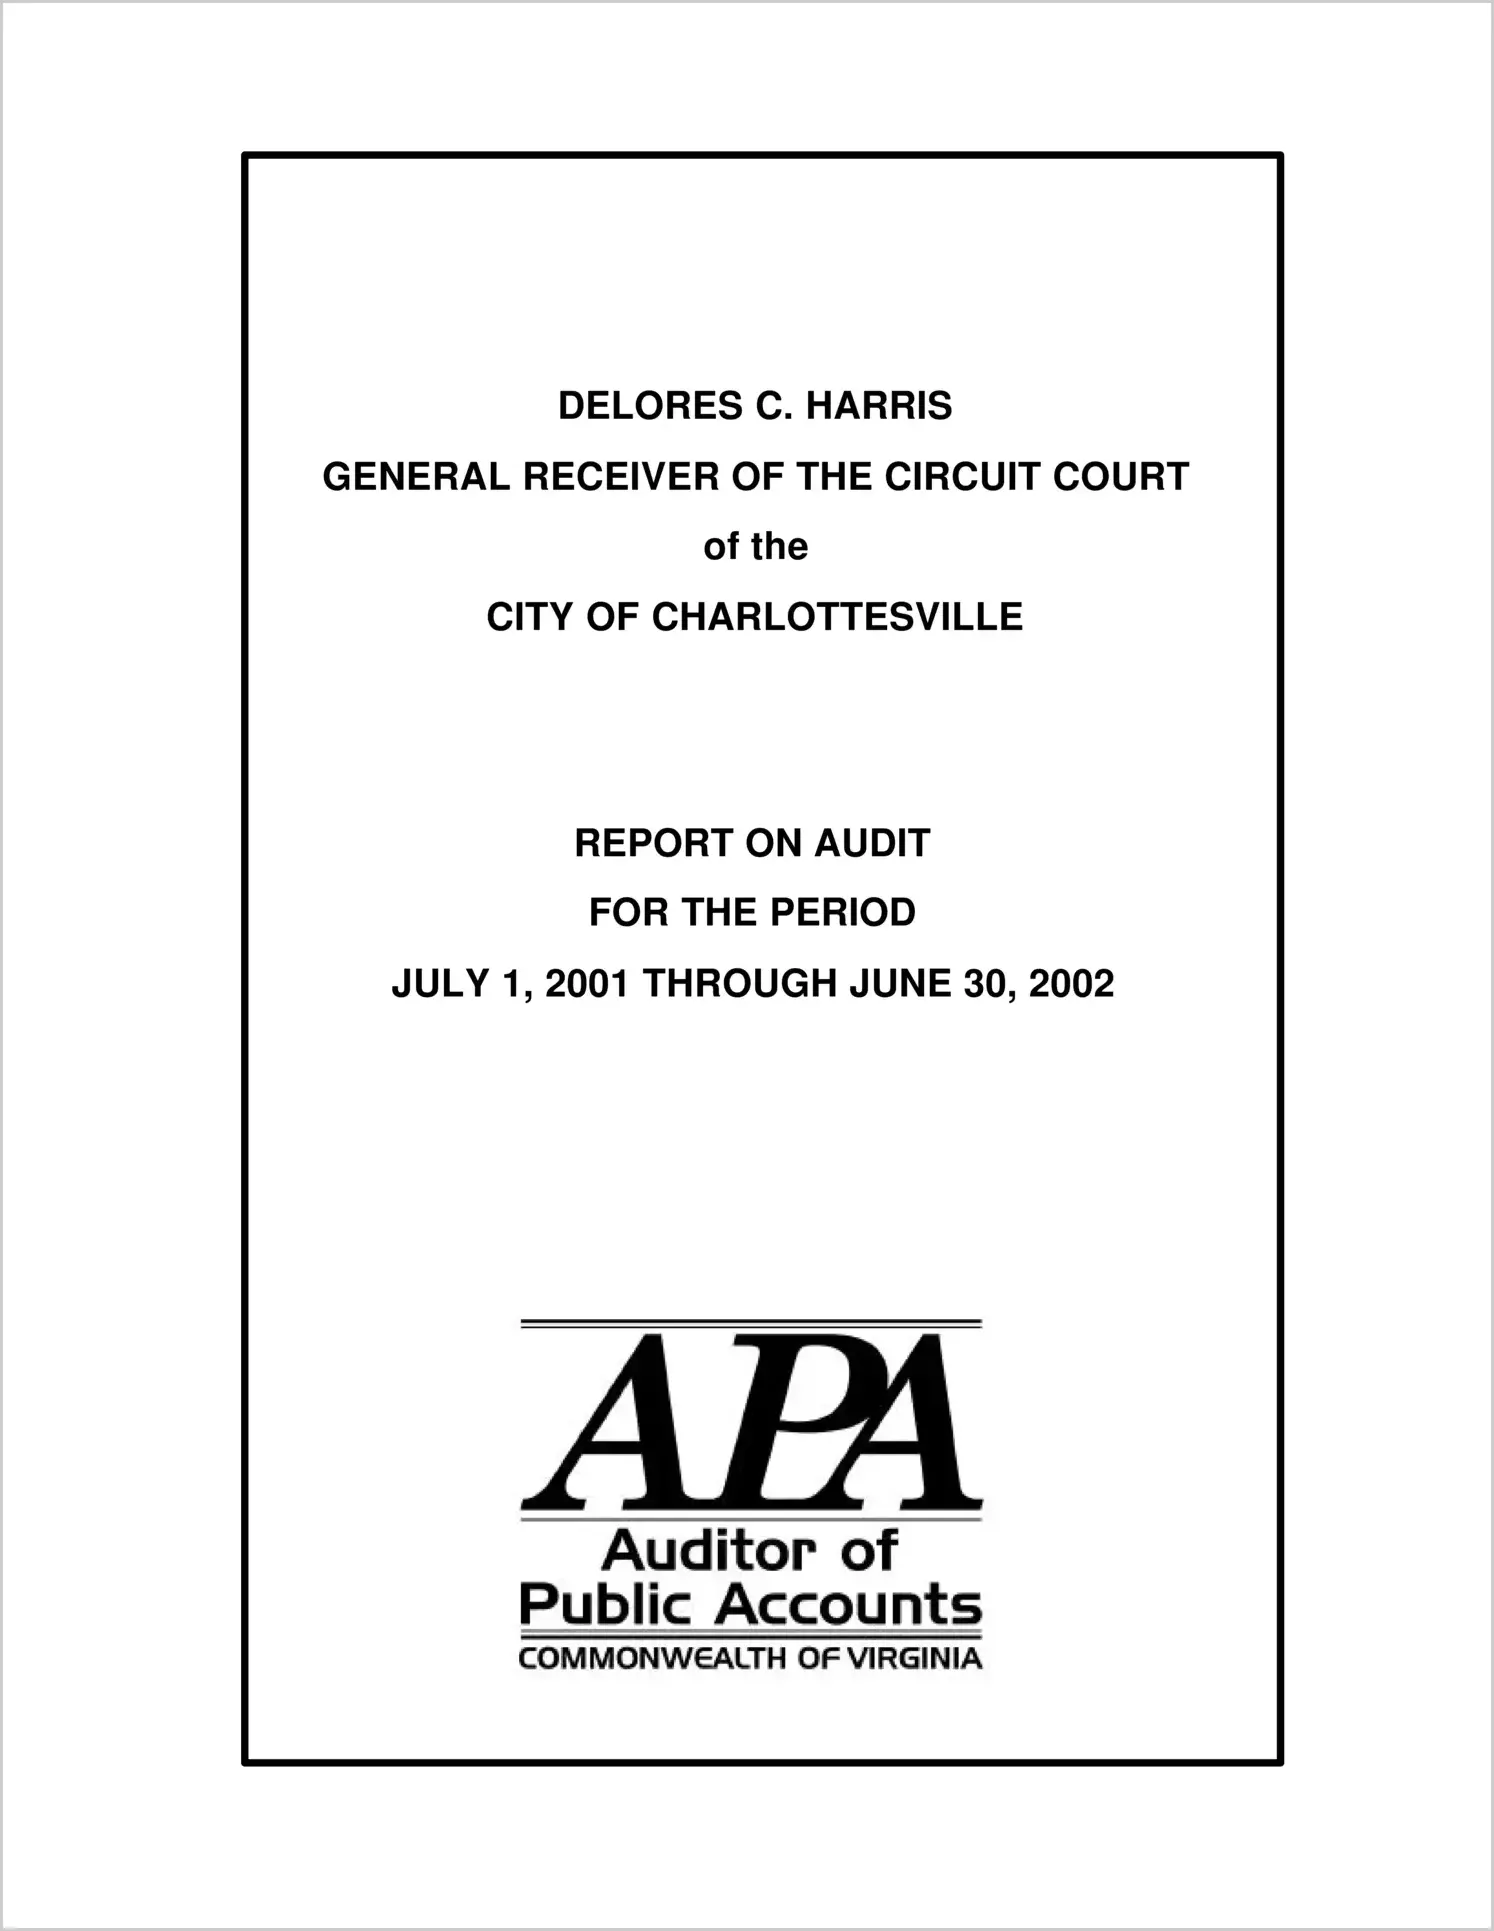 General Receiver of the Circuit Court for the period July 1, 2001 through June 30, 2002